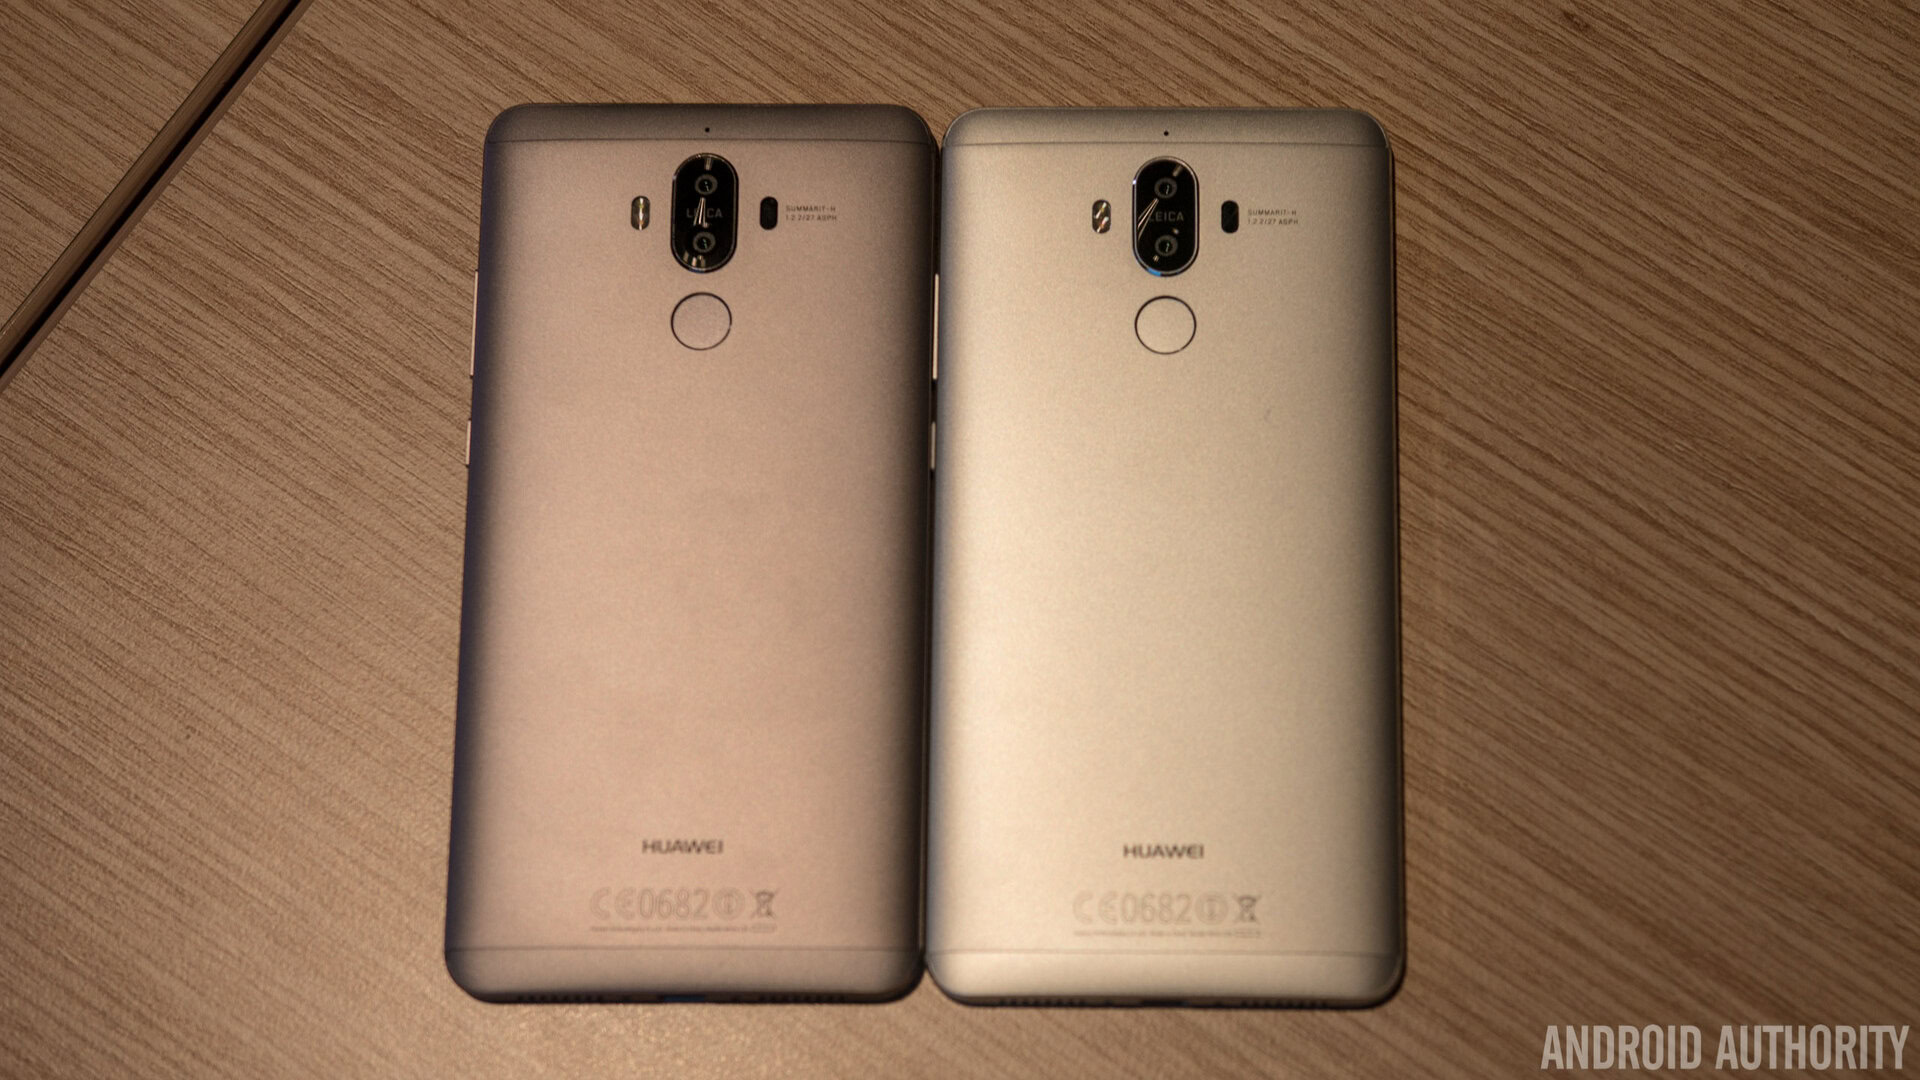 vruchten Inspiratie Kijker HUAWEI Mate 9 specs, price, release date and everything else you should know